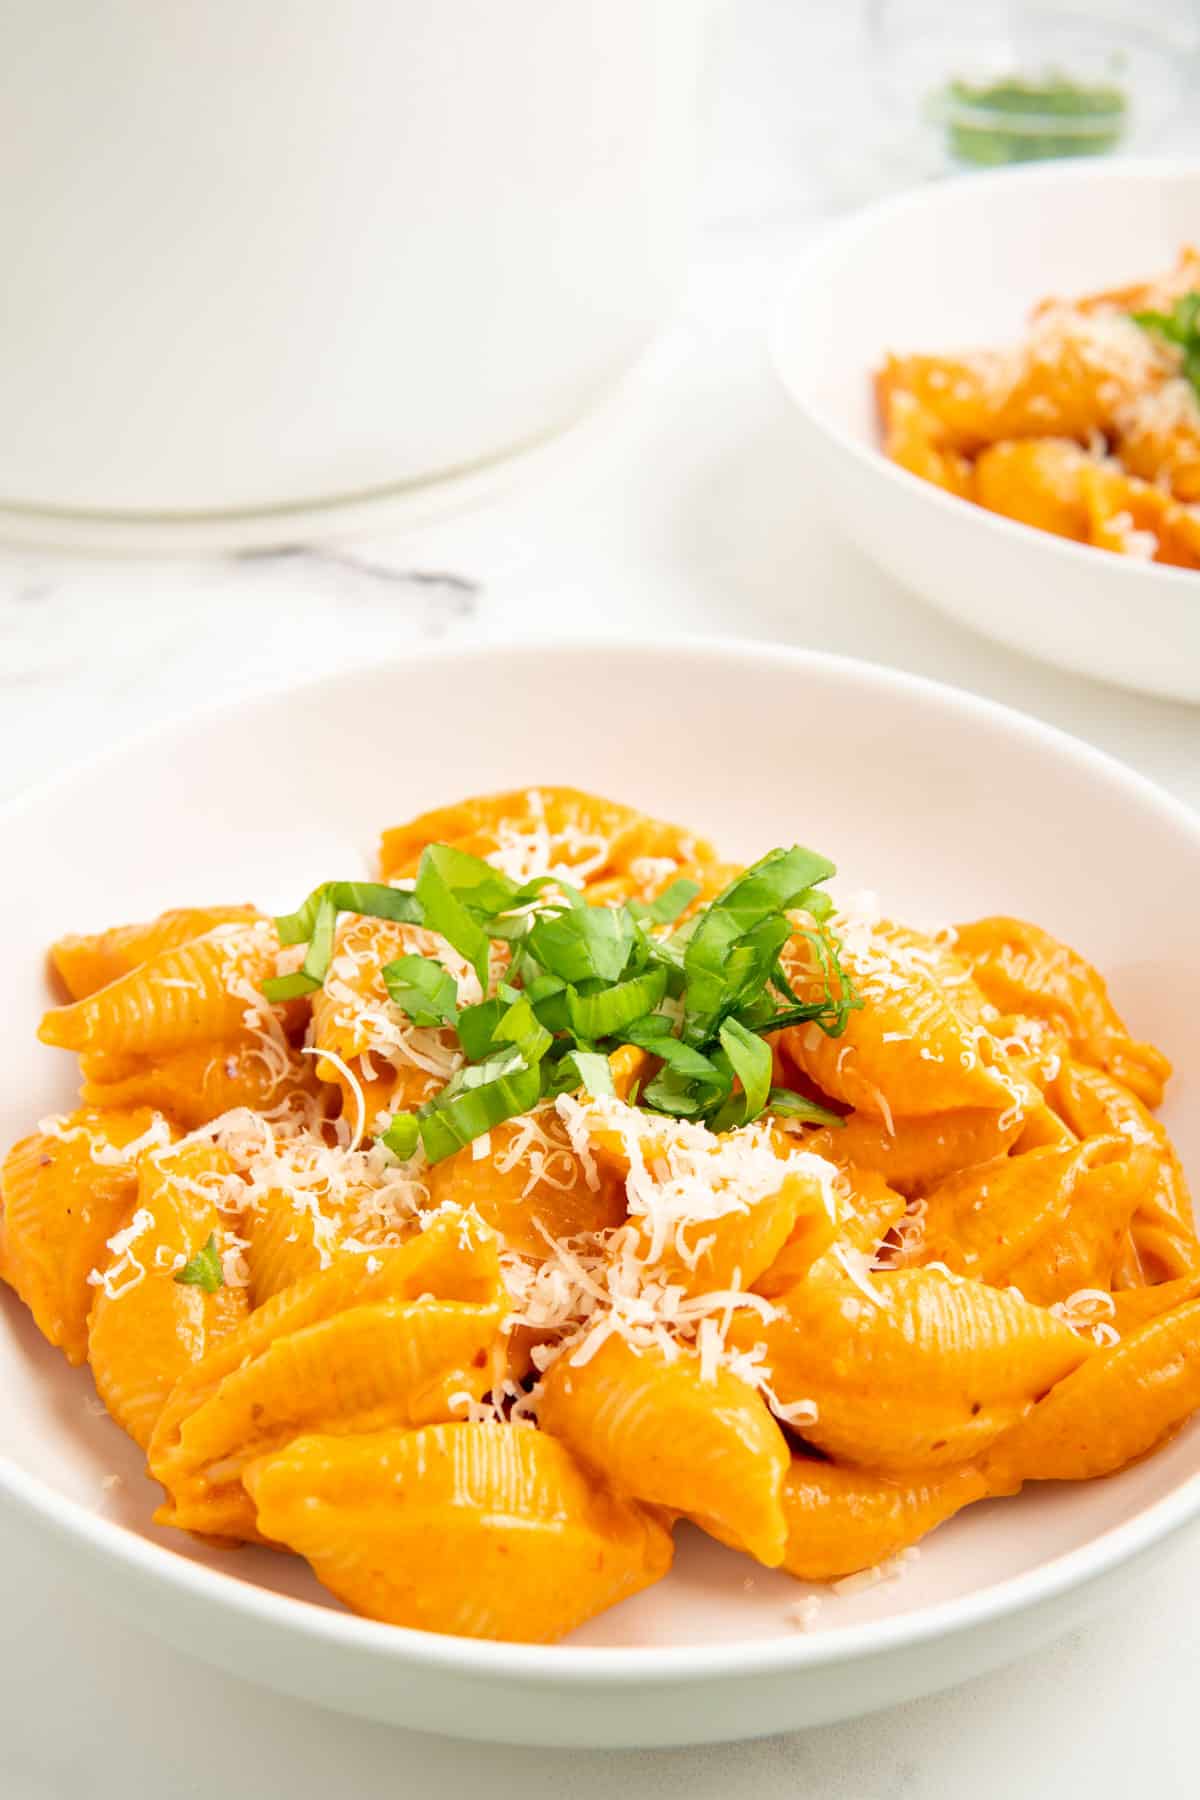 A close up of a bowl of pasta with vodka sauce.